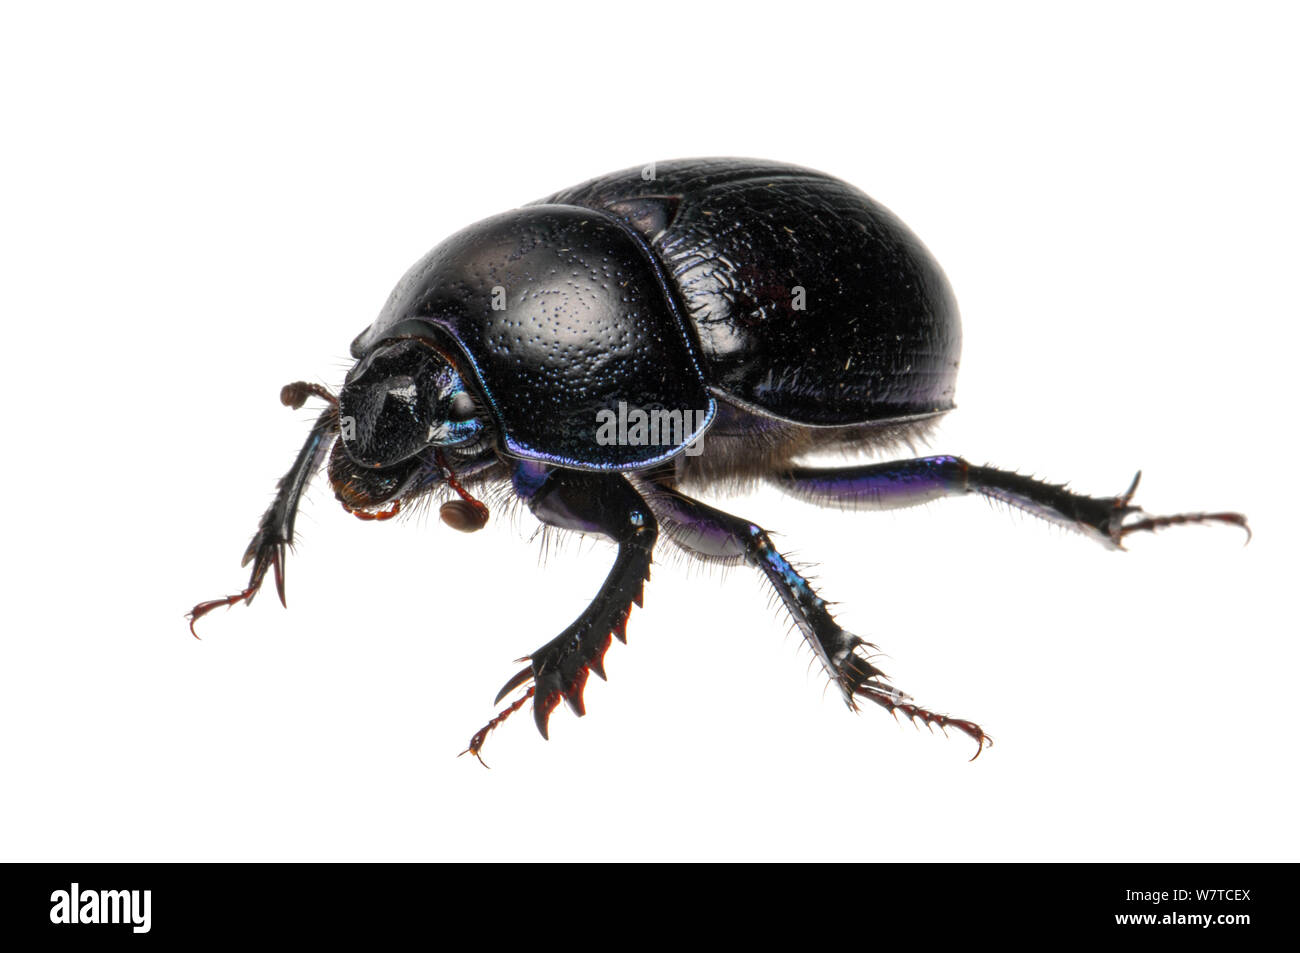 Forest Dung Beetle (Anoplotrupes stercorosus), Slovenia, Europe, June Meetyourneighbours.net project Stock Photo